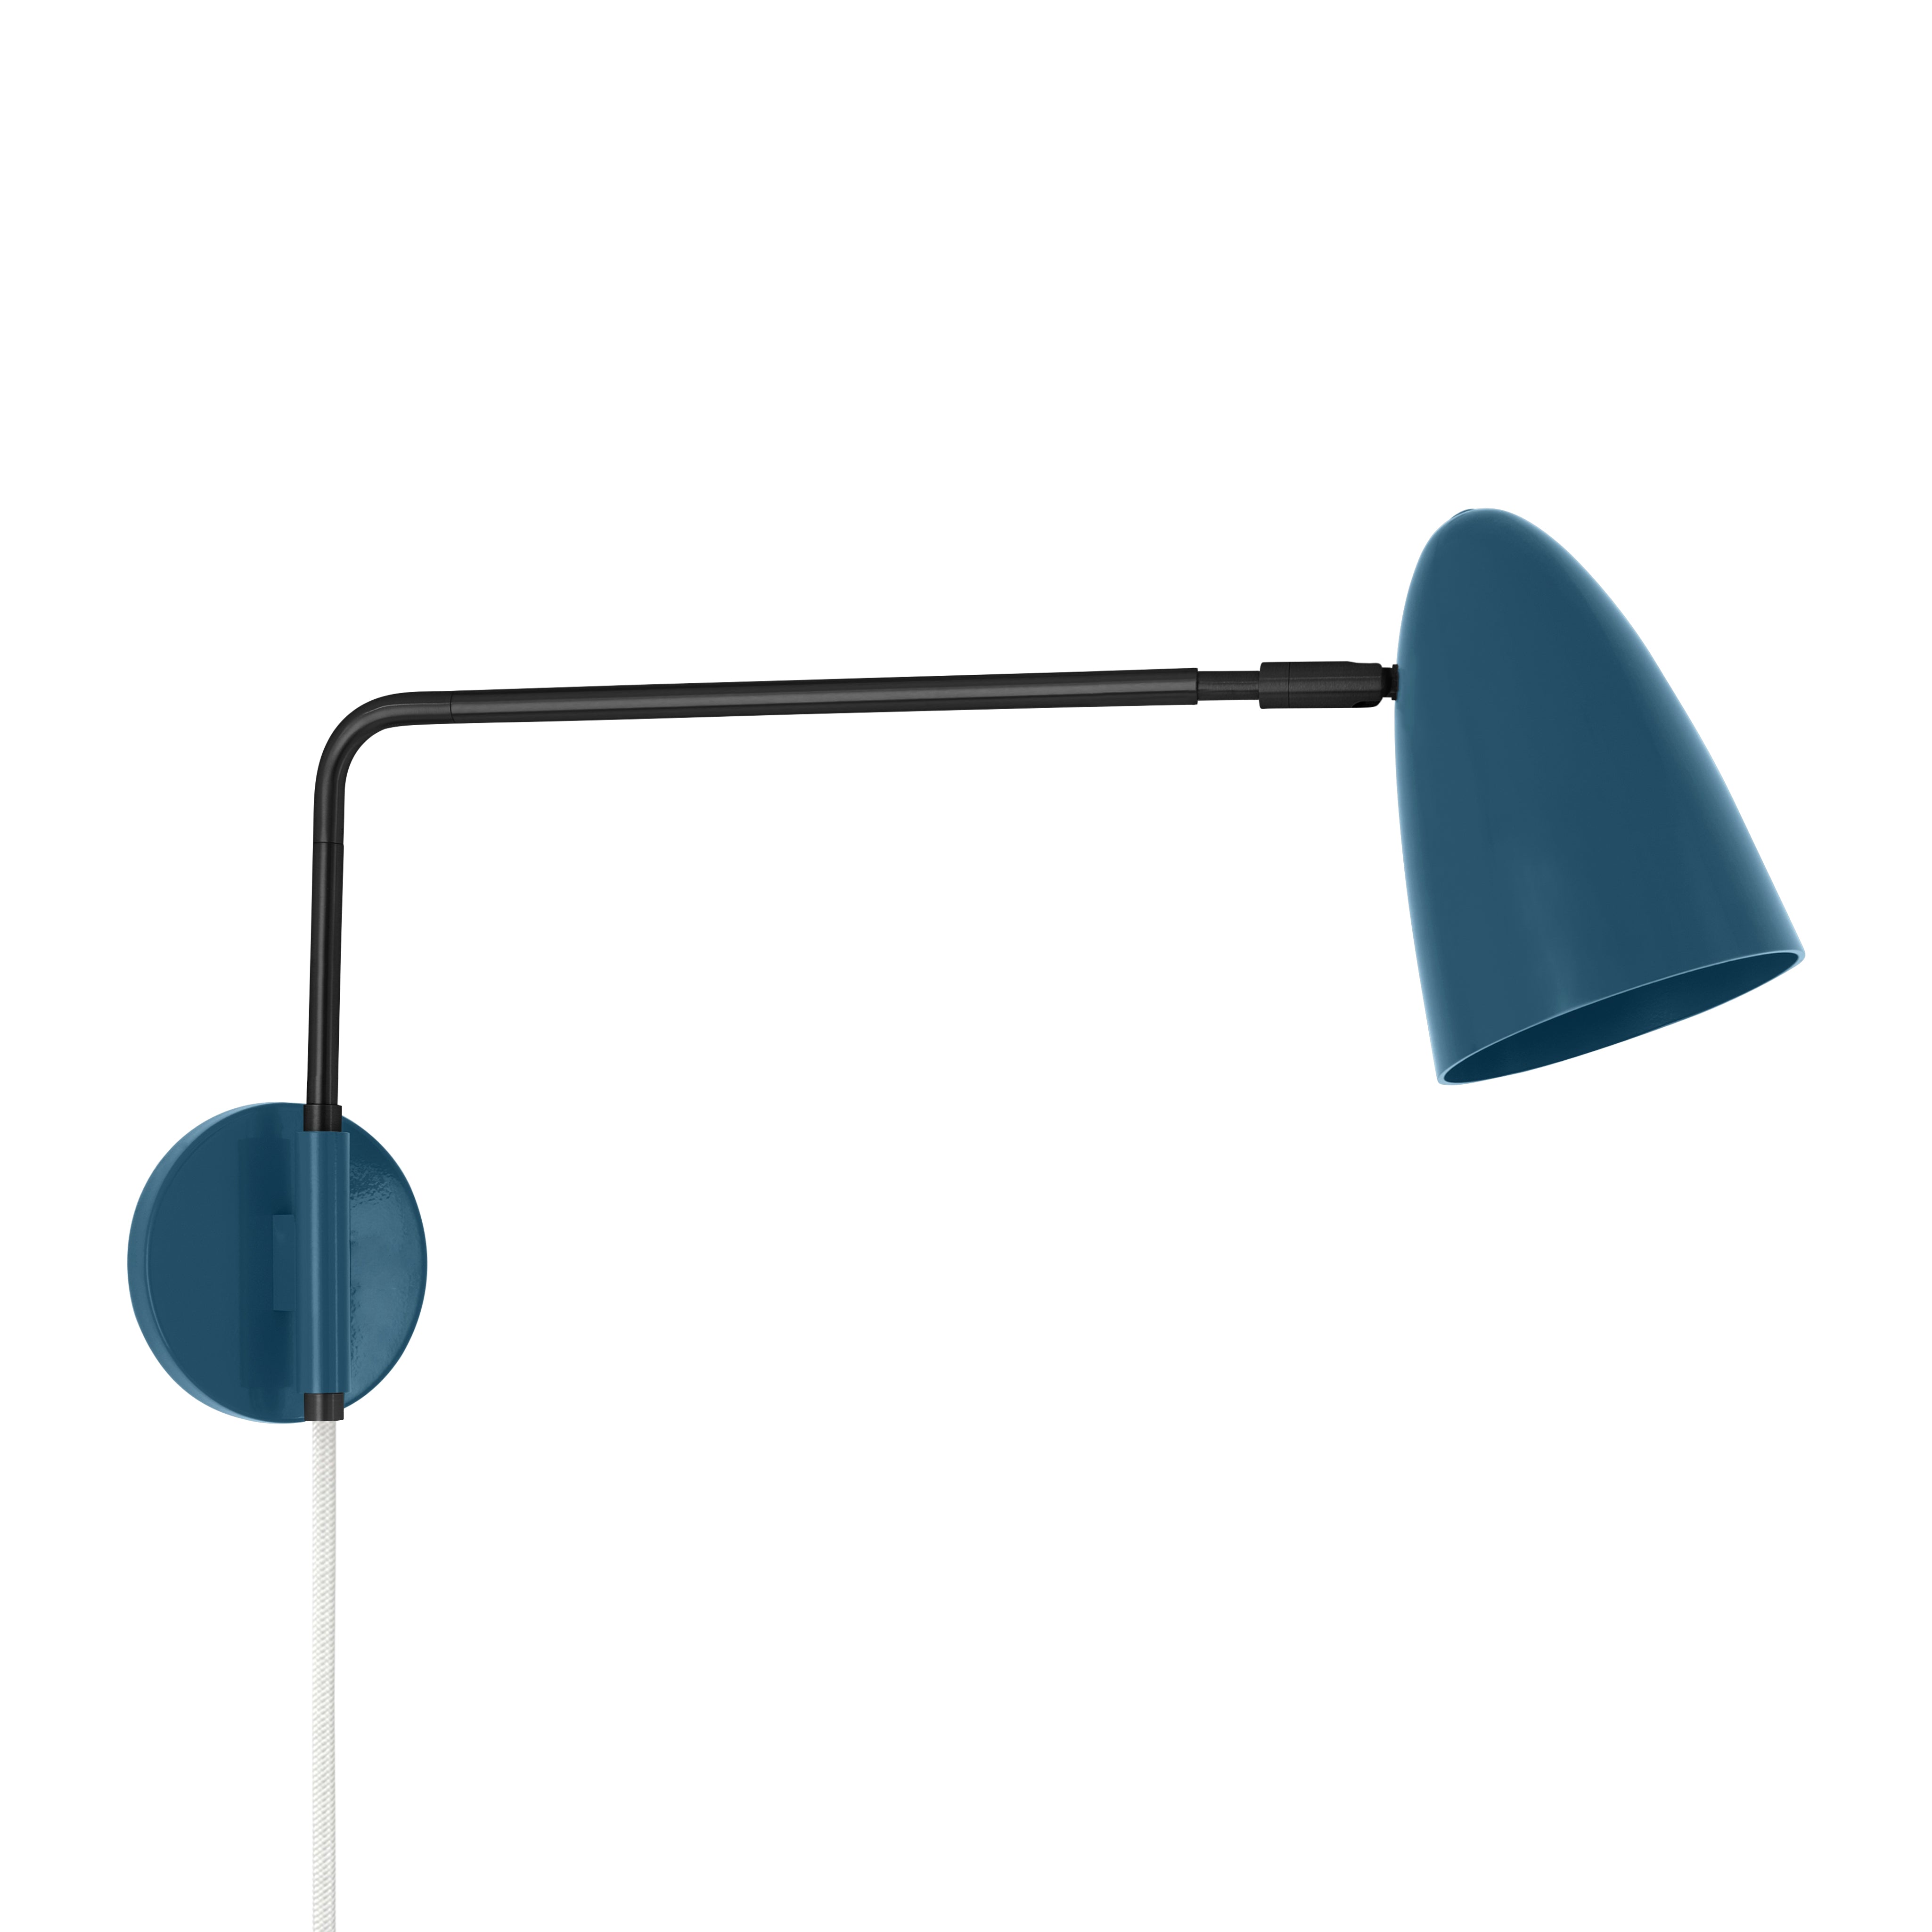 Black and slate blue color Boom Swing Arm plug-in sconce Dutton Brown lighting